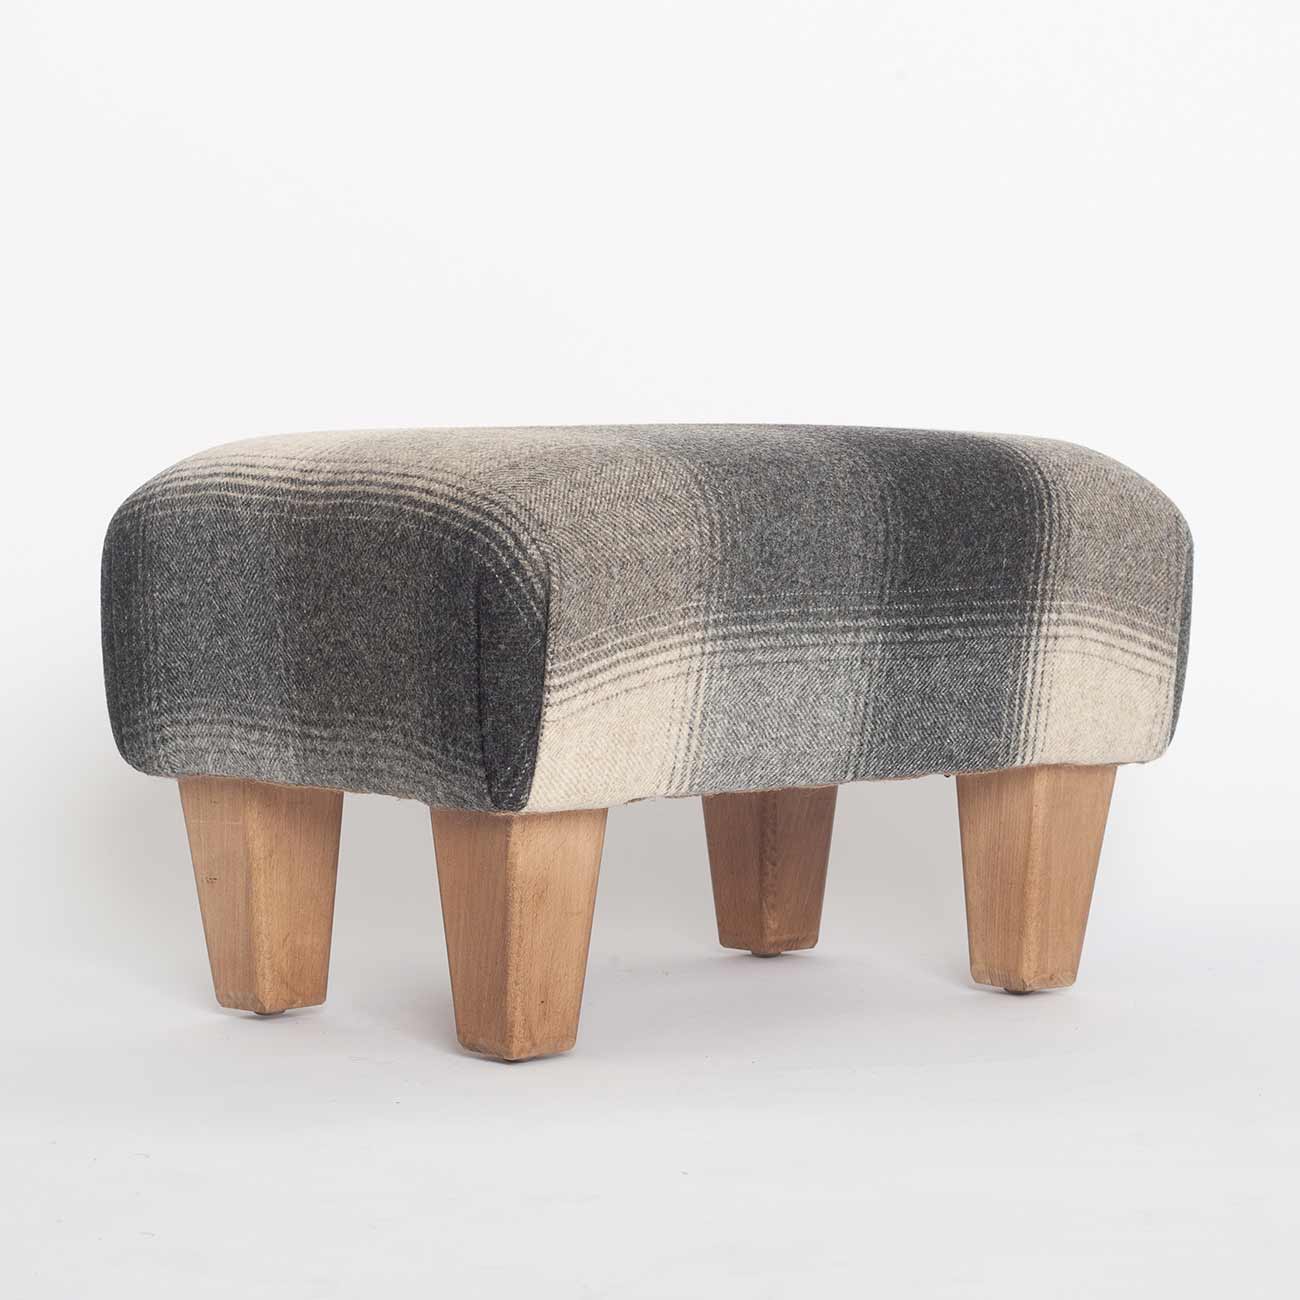 grey-squares-footstool9 fabric from JLP